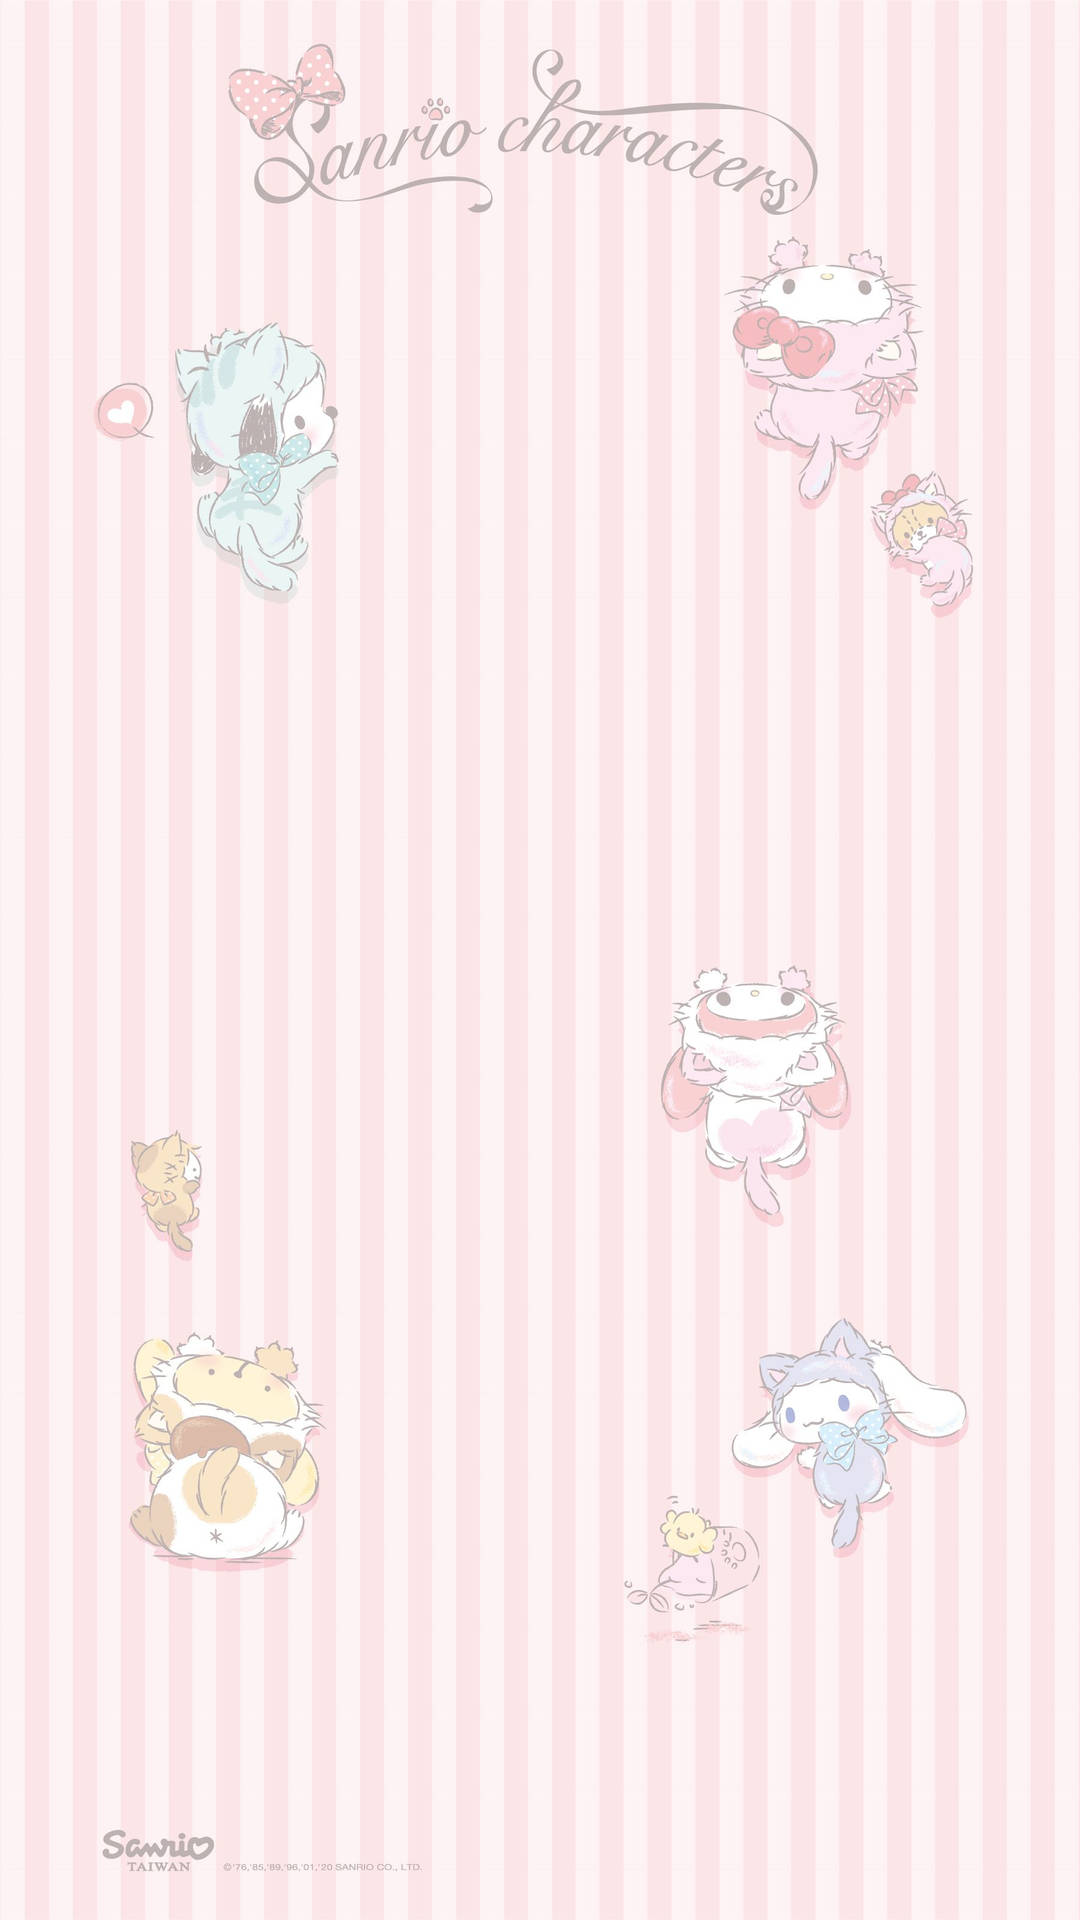 A sweet moment with Cute Sanrio Wallpaper